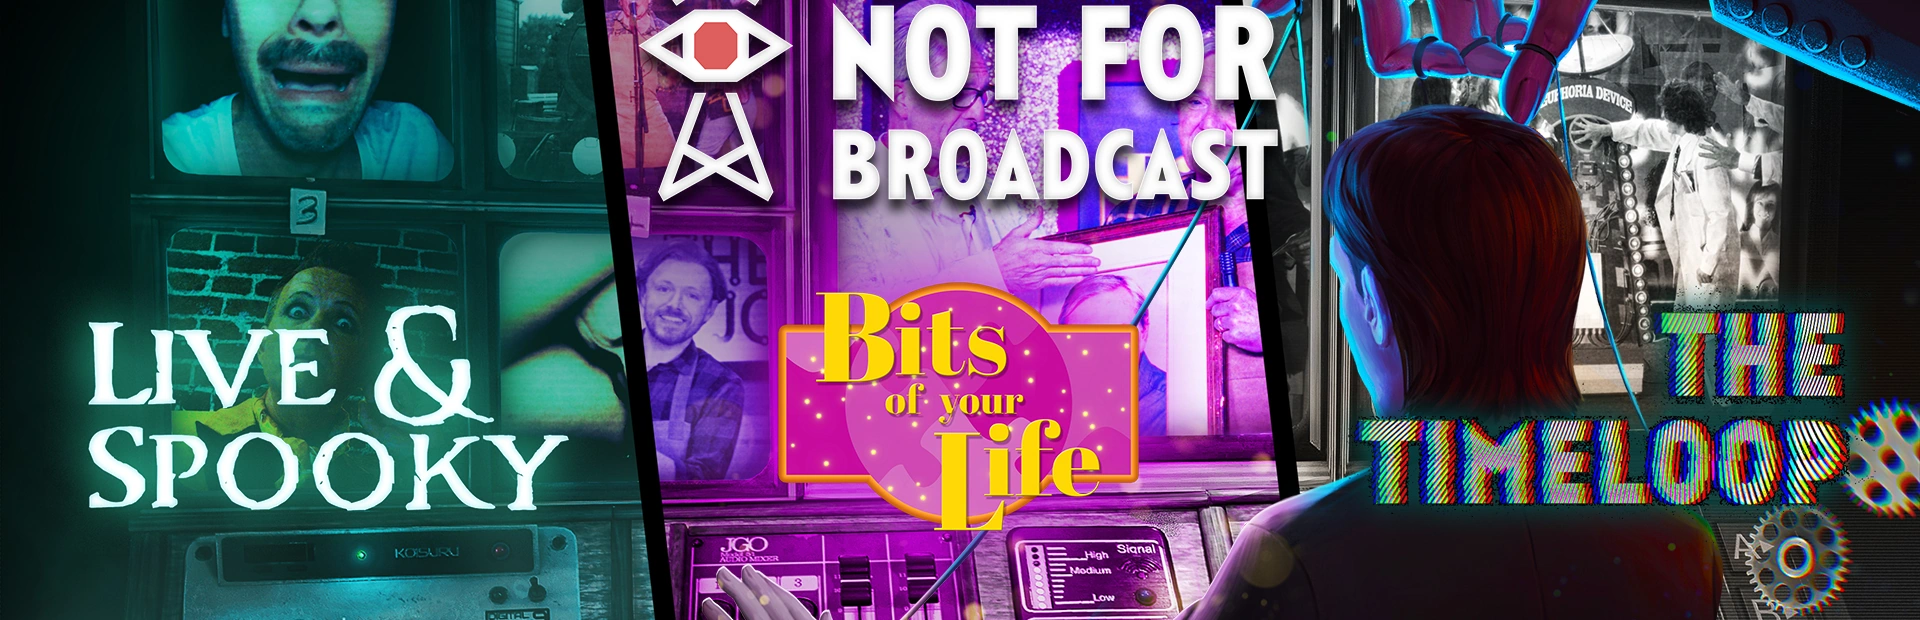 Not.For .Broadcast.banner2